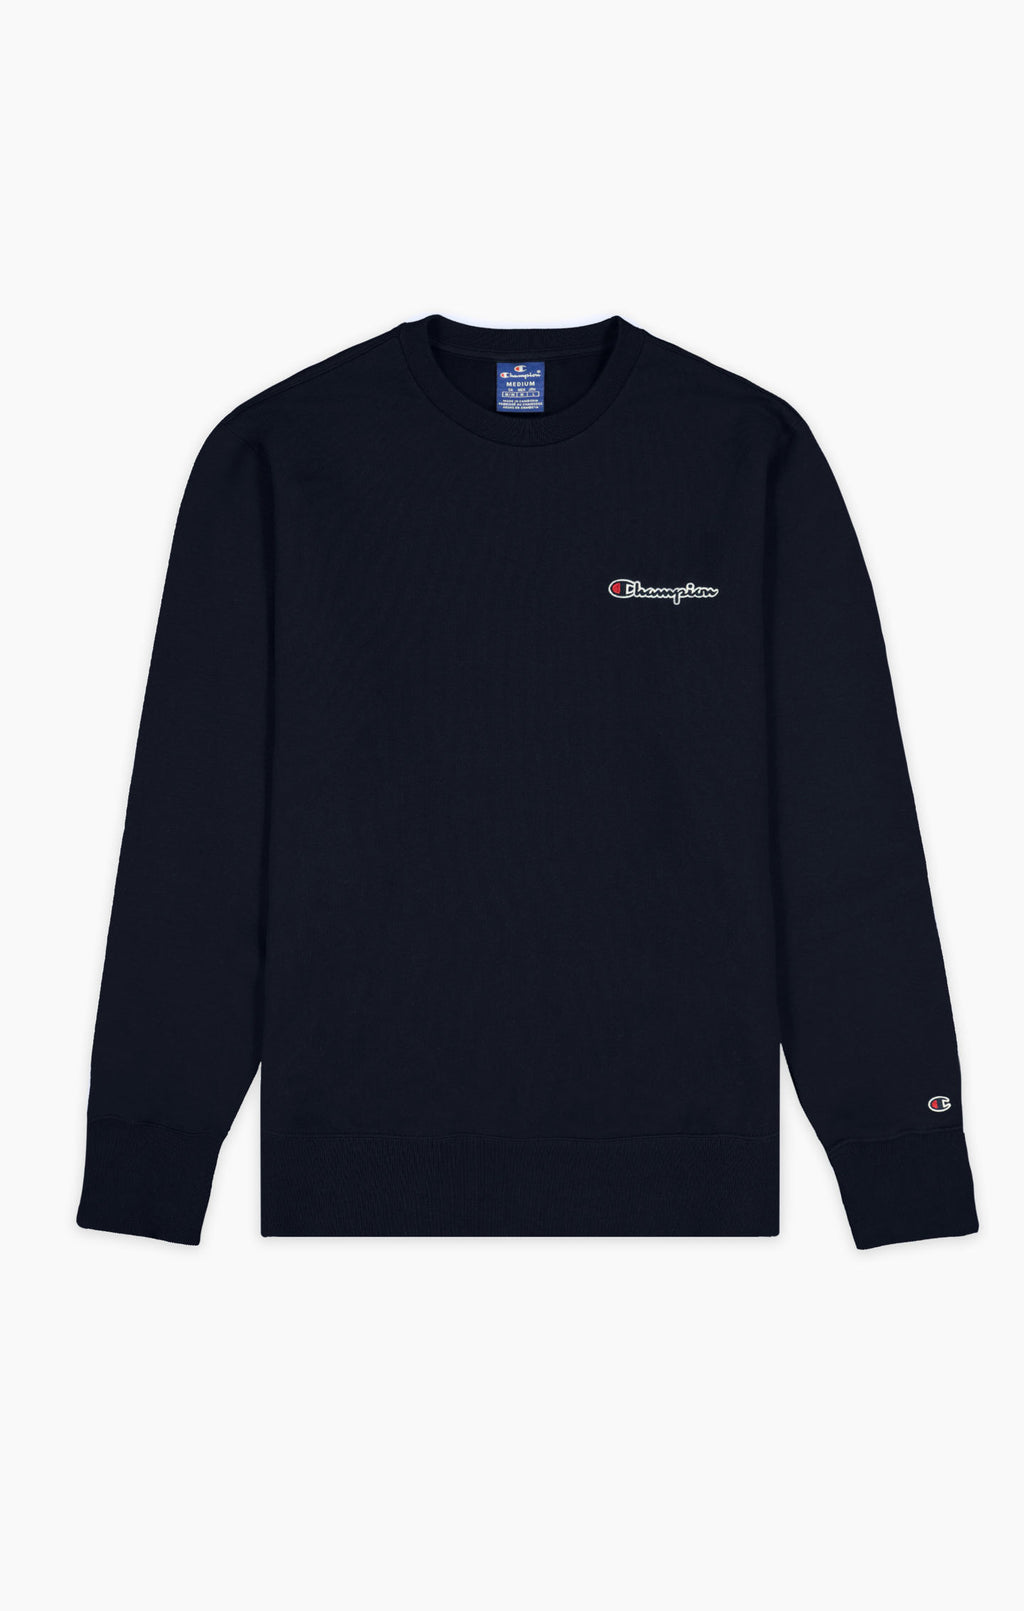 Champion Crewneck Rochester Small Name 'Navy Blue'